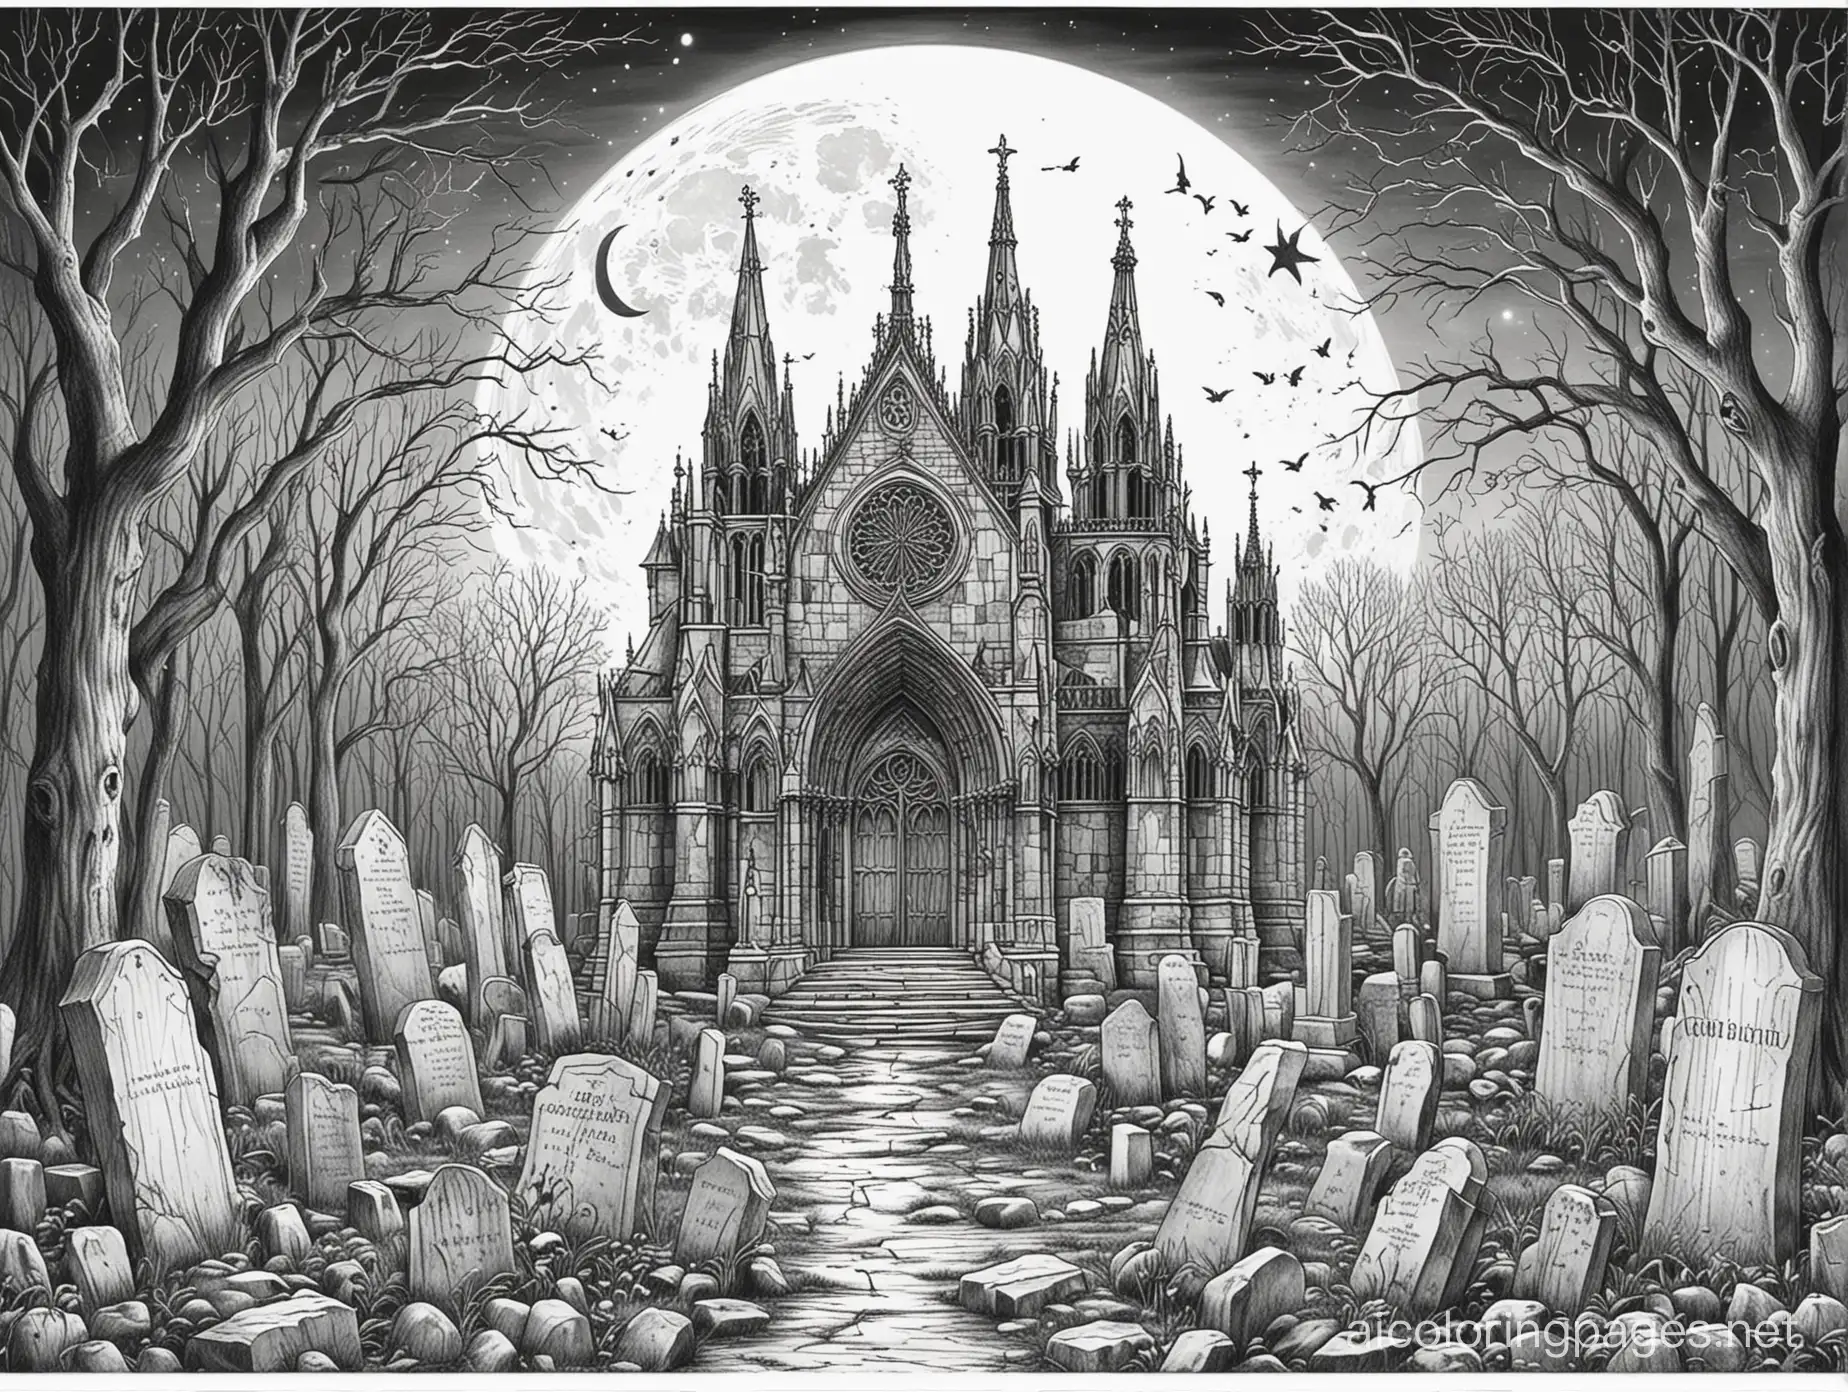 gothic cathedral creepy gravestones graveyard trees moon front view, Coloring Page, black and white, line art, white background, Simplicity, Ample White Space. The background of the coloring page is plain white to make it easy for young children to color within the lines. The outlines of all the subjects are easy to distinguish, making it simple for kids to color without too much difficulty